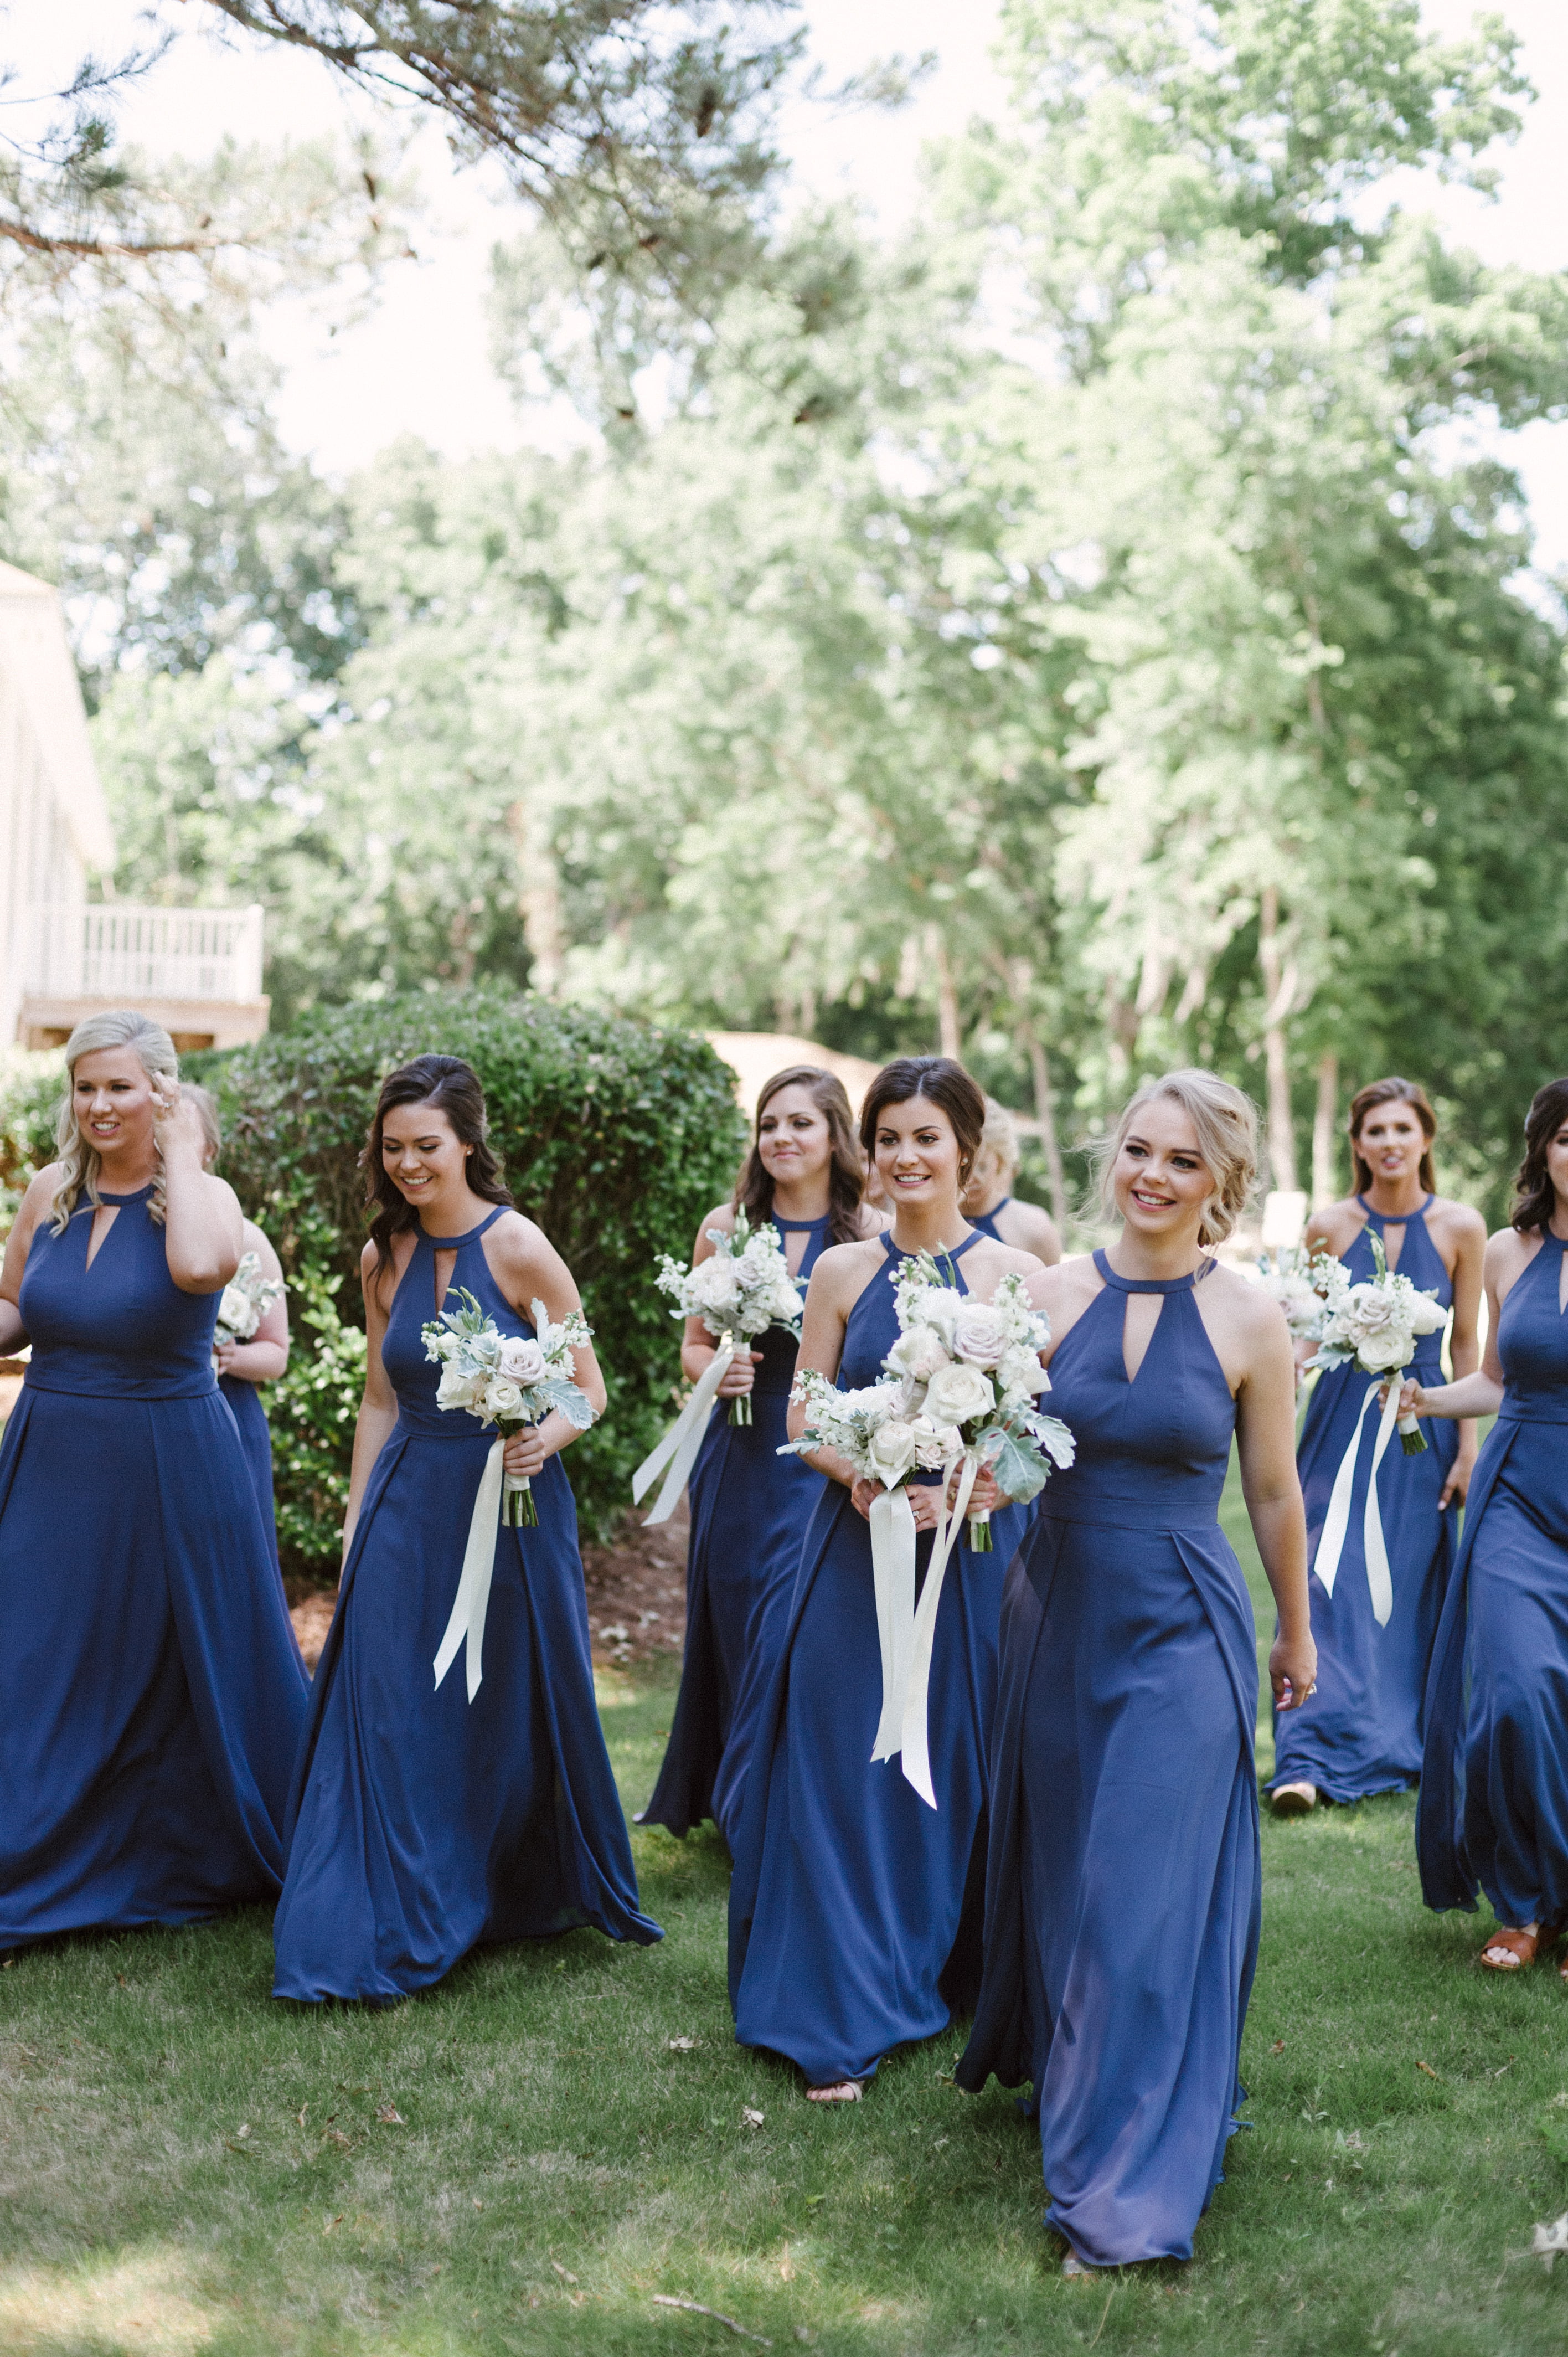 A super happy bridal party approaching a grassy landscape for wedding party photos in Selma, Alabama behind Swift Creek